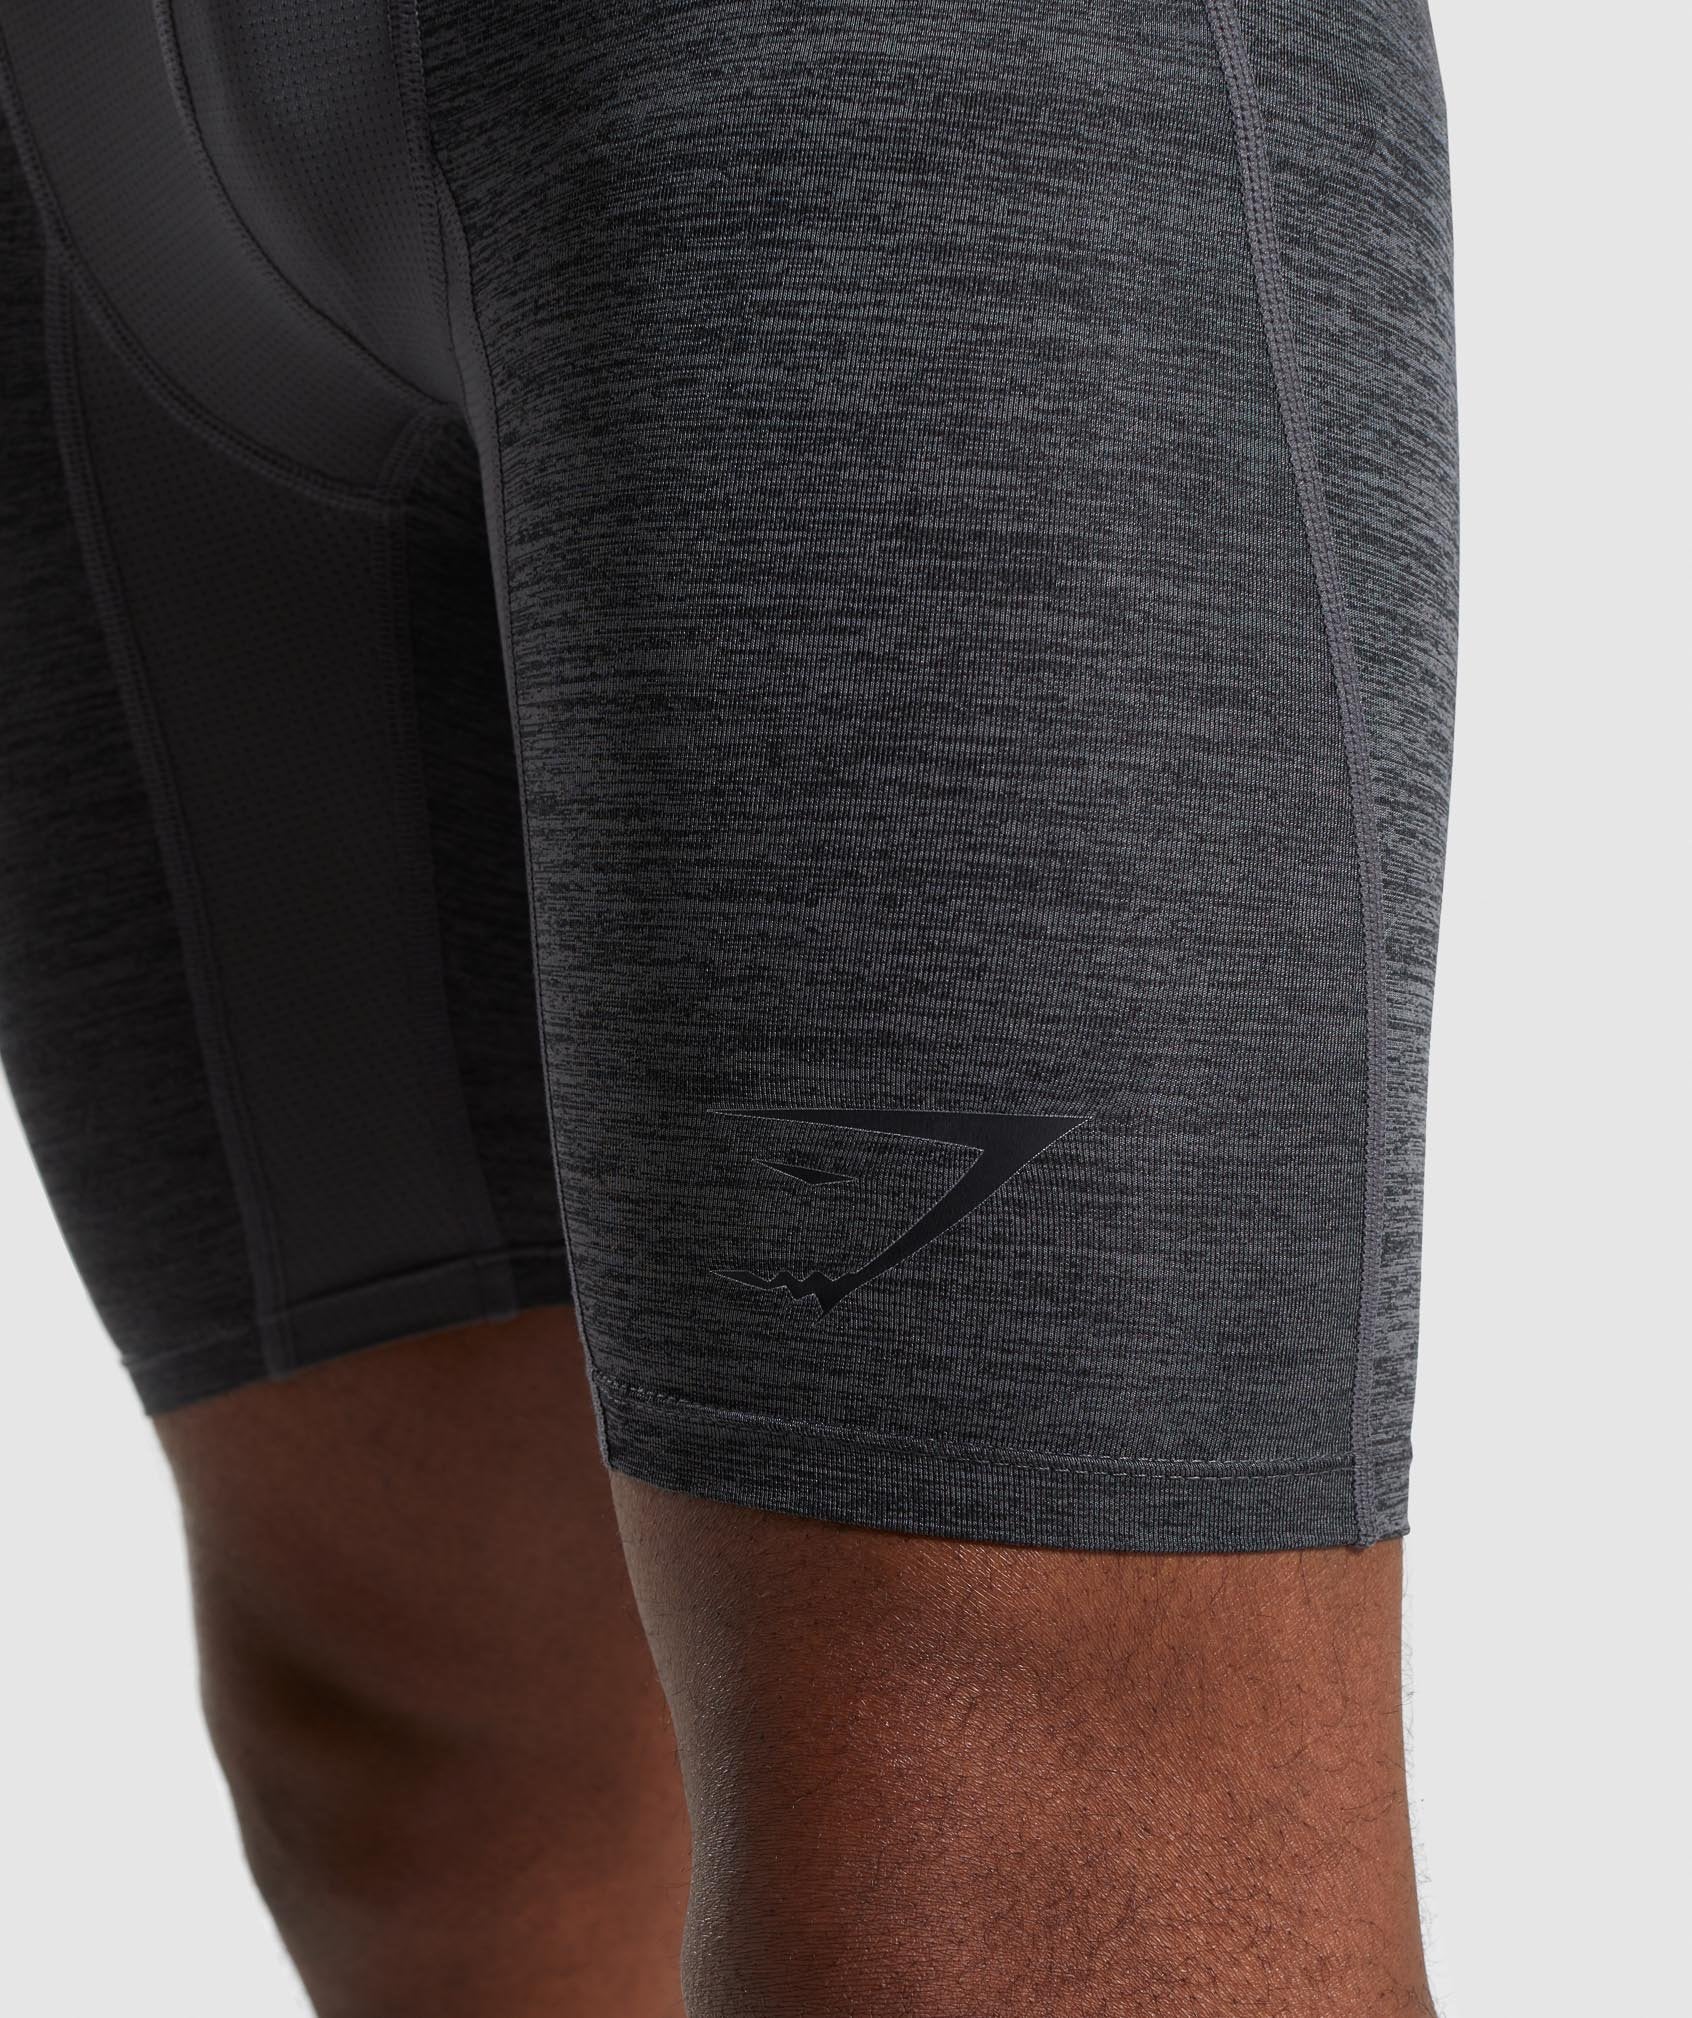 Element+ Baselayer Shorts in Black Marl - view 6